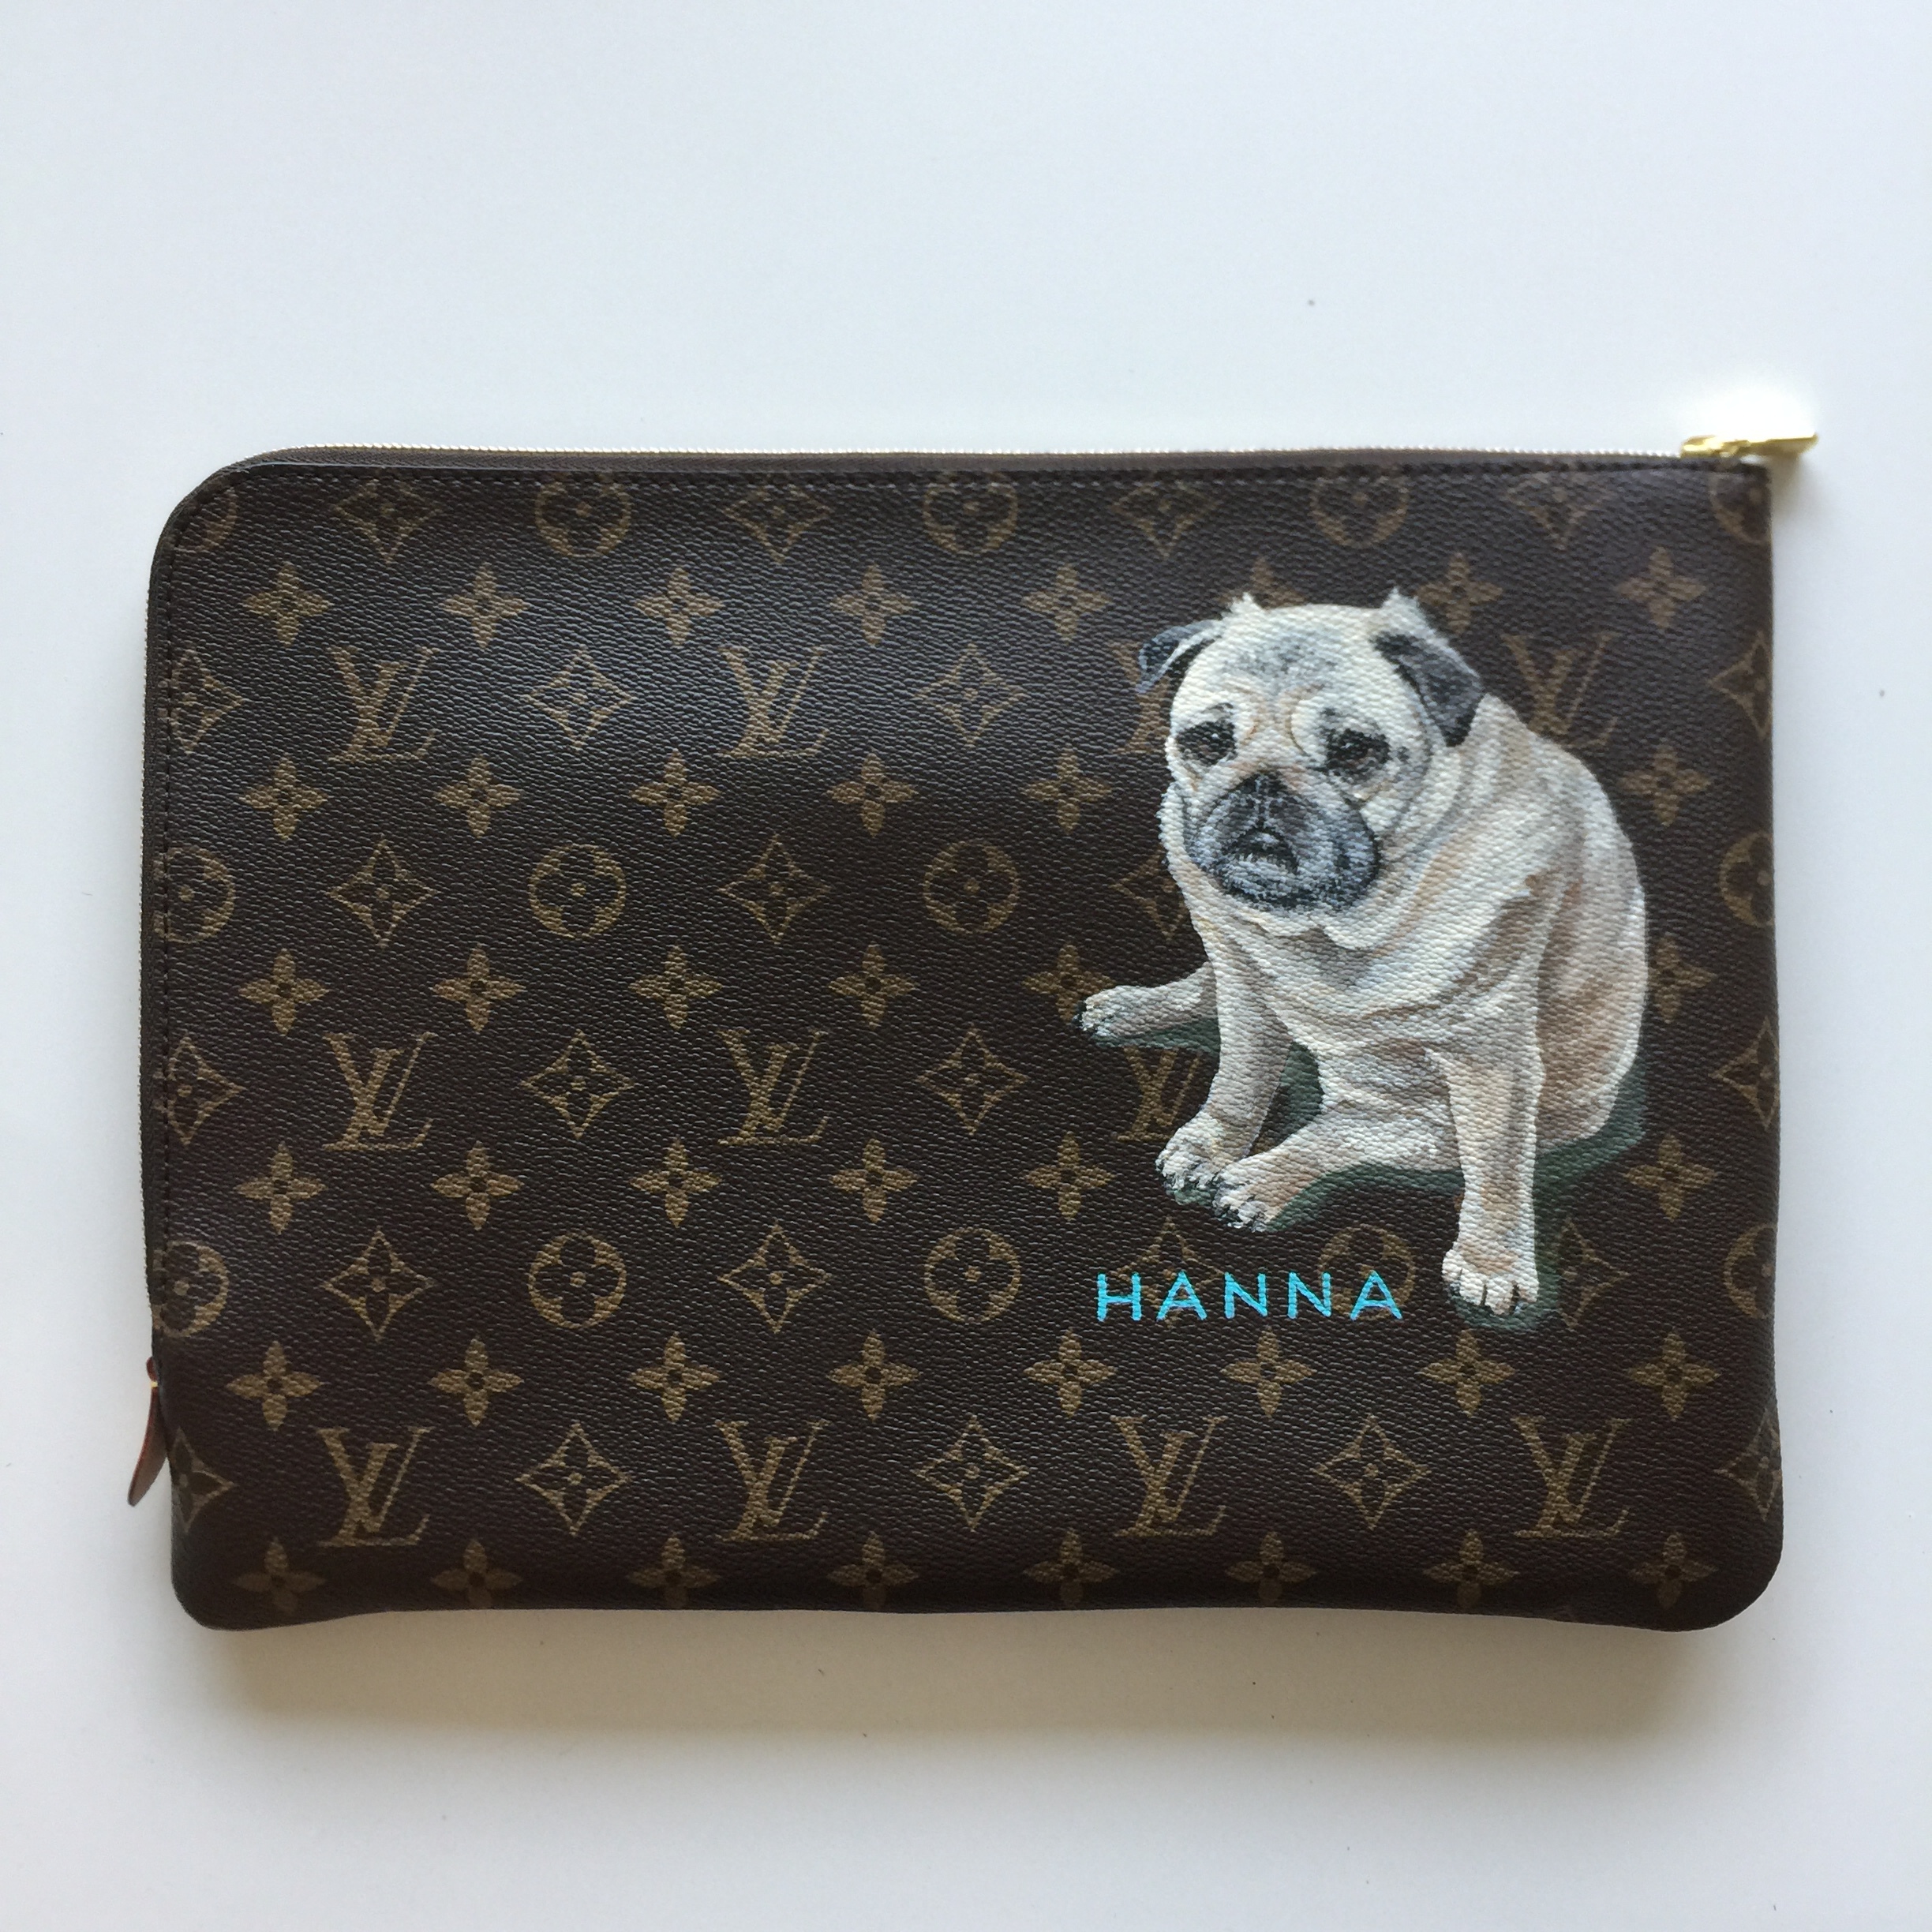 Hanna on a Louis Vuitton clutch, for Lisa Halmos.